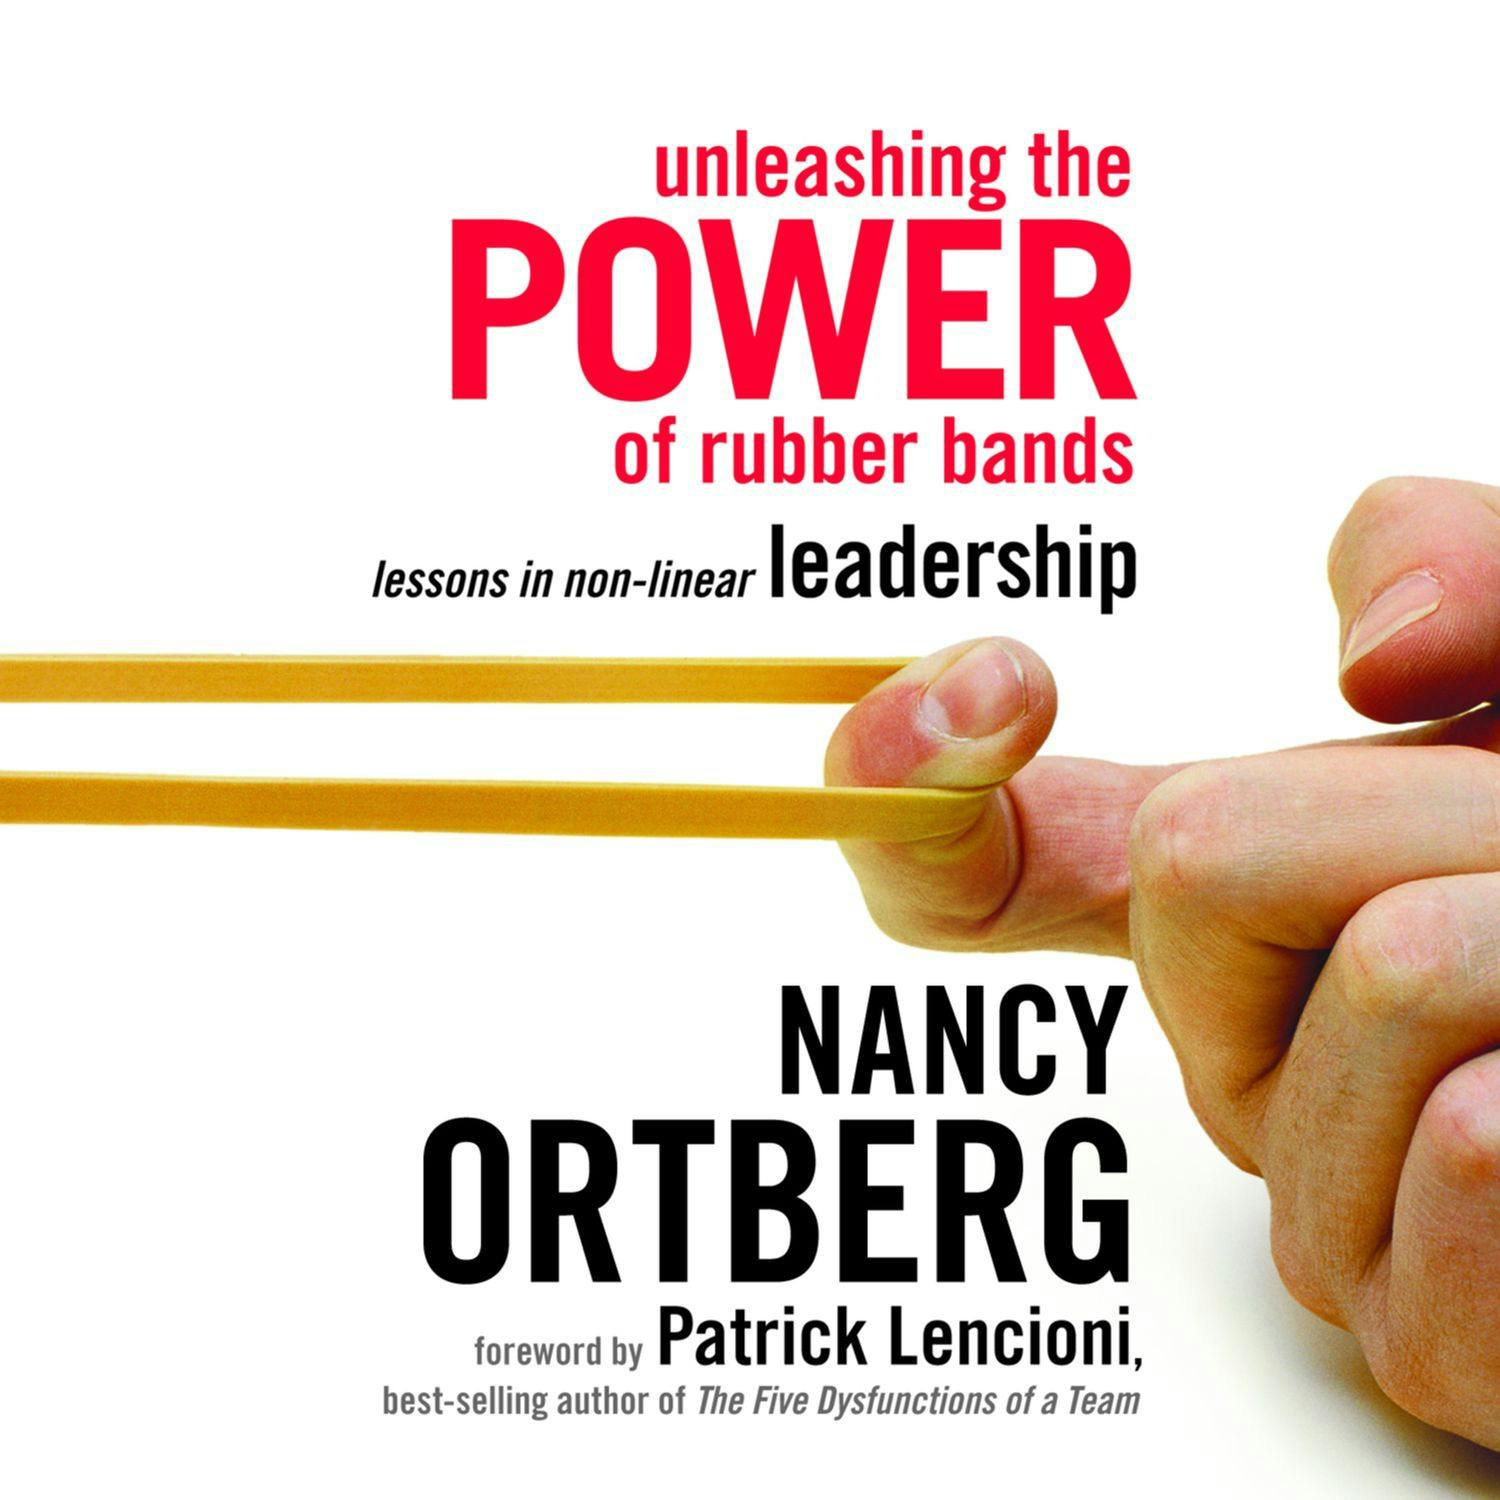 Unleashing the Power of Rubber Bands: Lessons in Non-linear Leadership - Nancy Ortberg